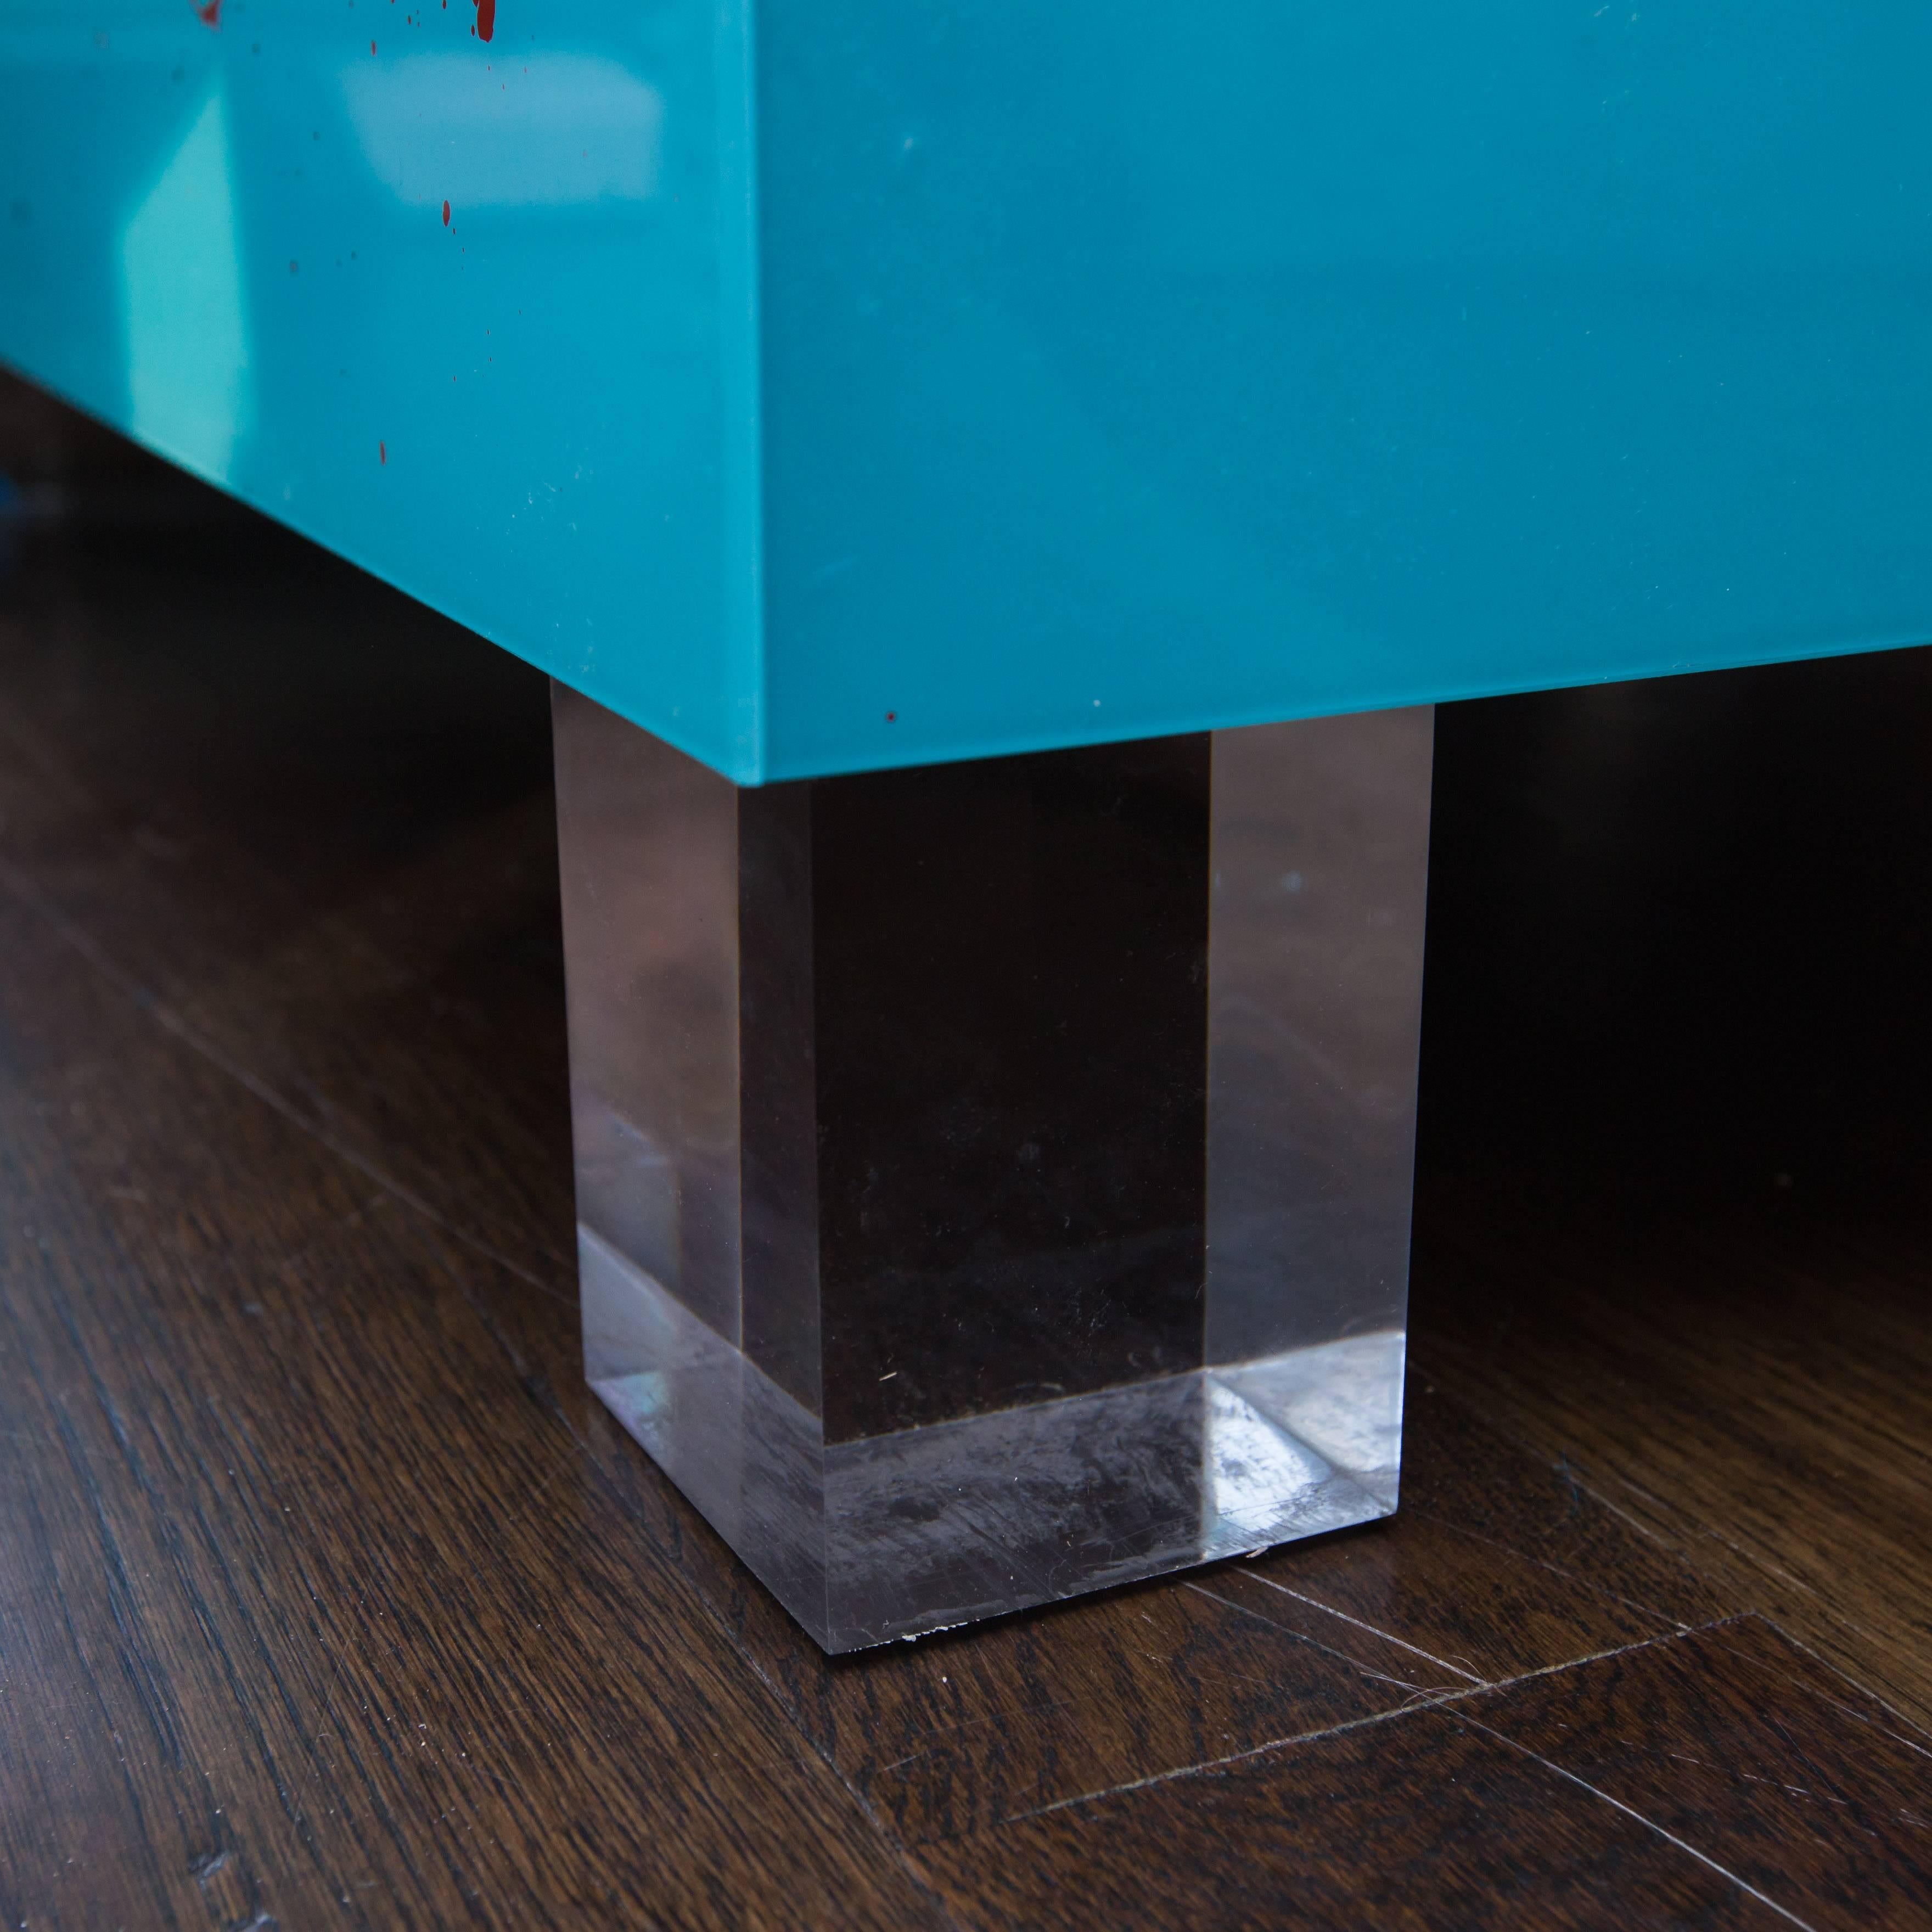 Custom, one-of-a-kind coffee table made of reverse drip-painted Lucite panels sitting on solid Lucite feet.